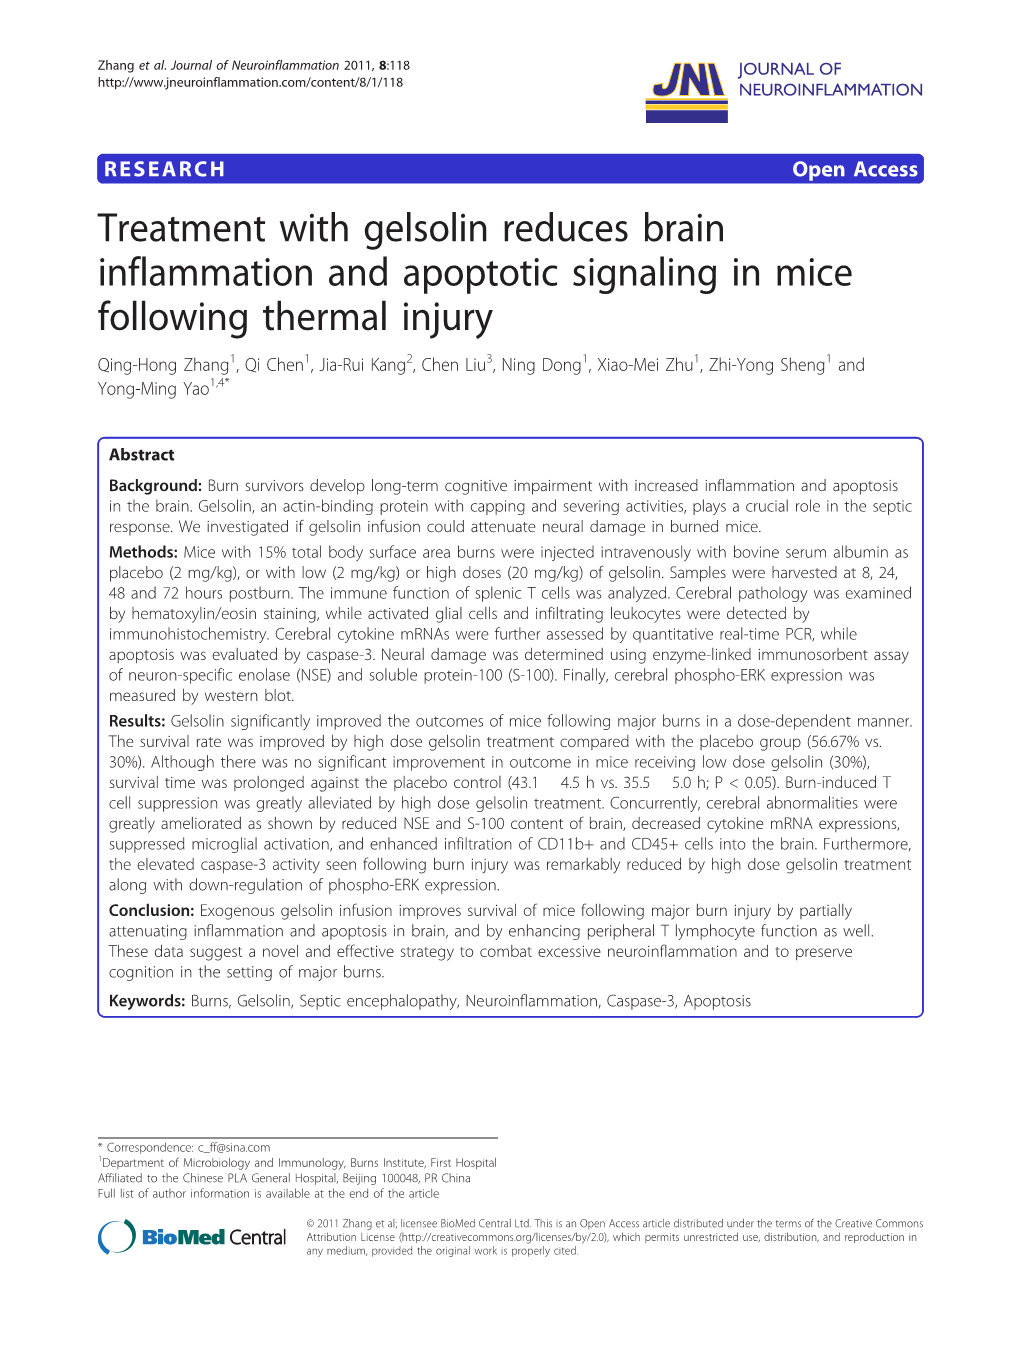 Treatment with Gelsolin Reduces Brain Inflammation and Apoptotic